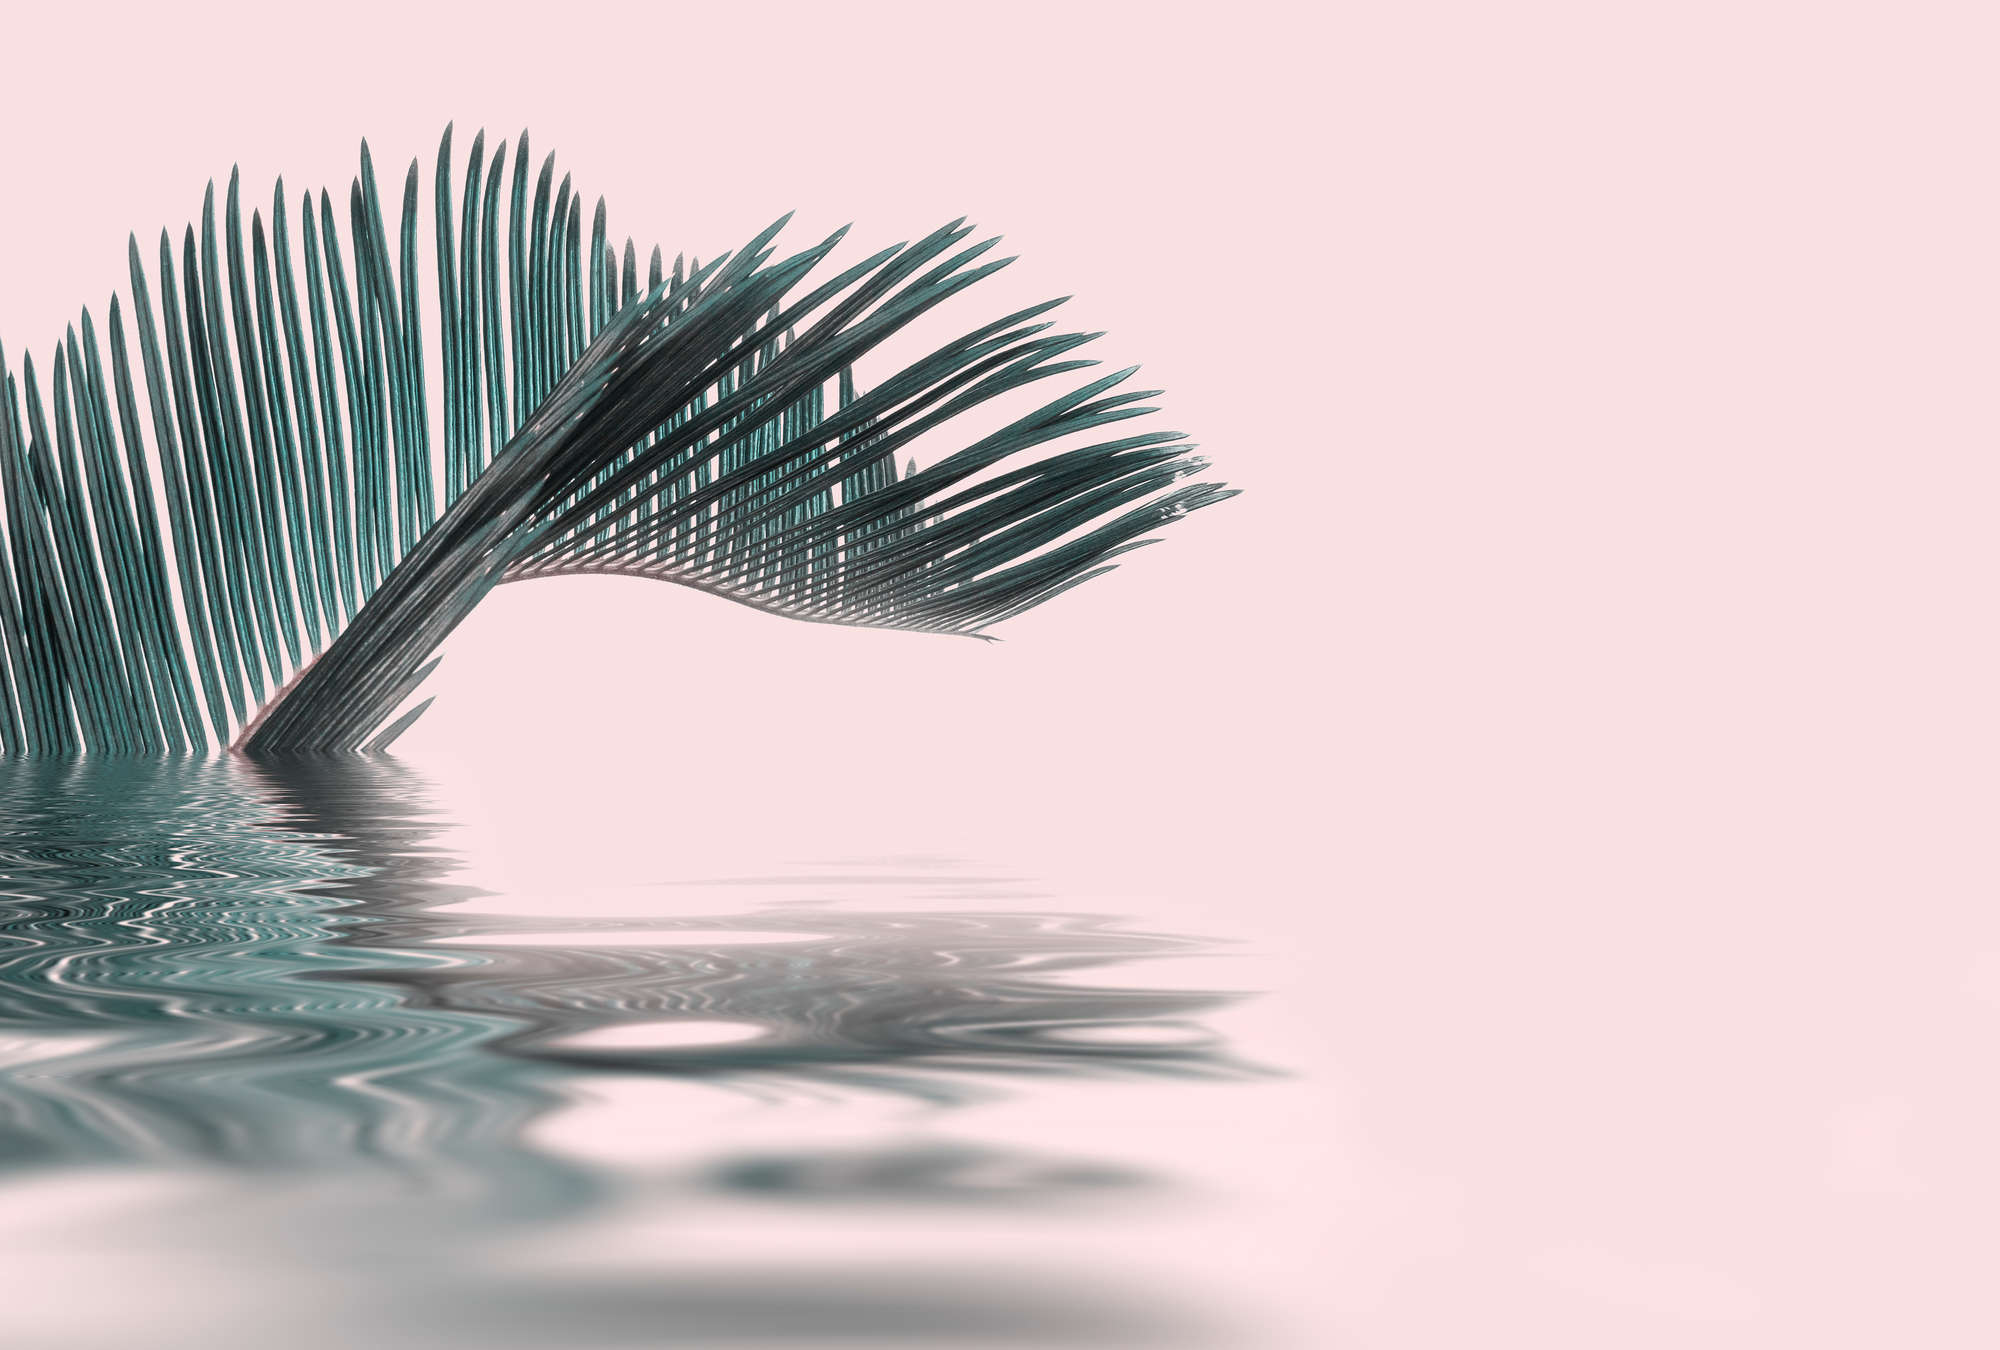             Photo wallpaper palm leaf in water - green & pink
        